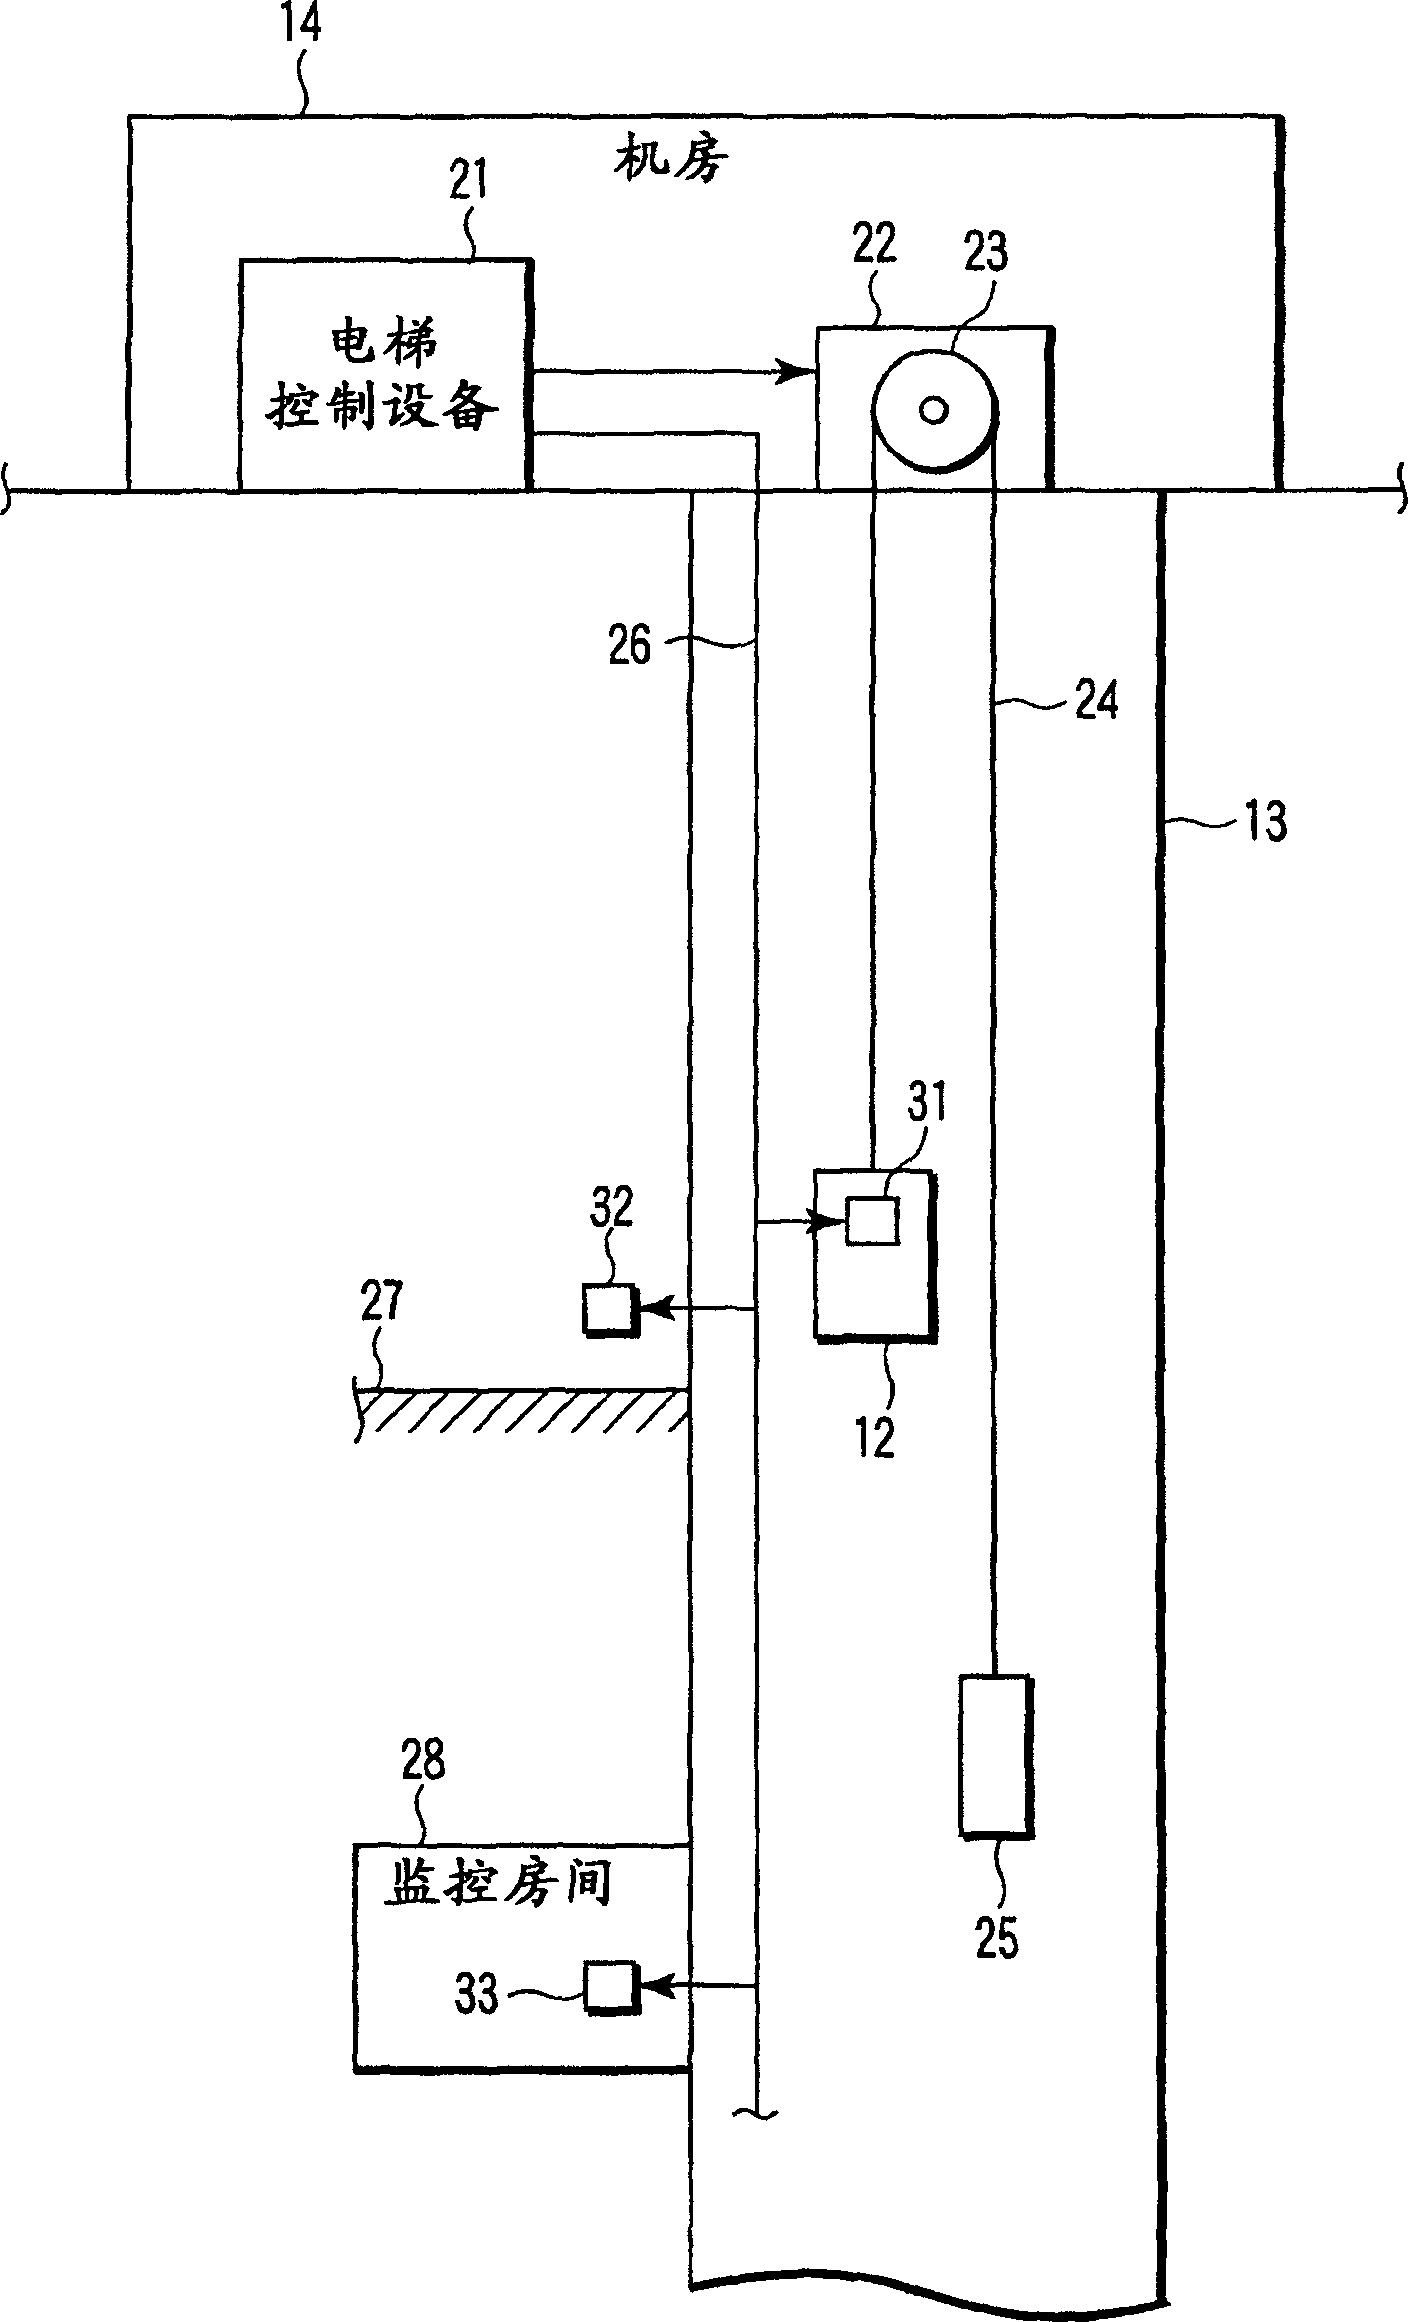 Display system for elevator and information display device used in this system